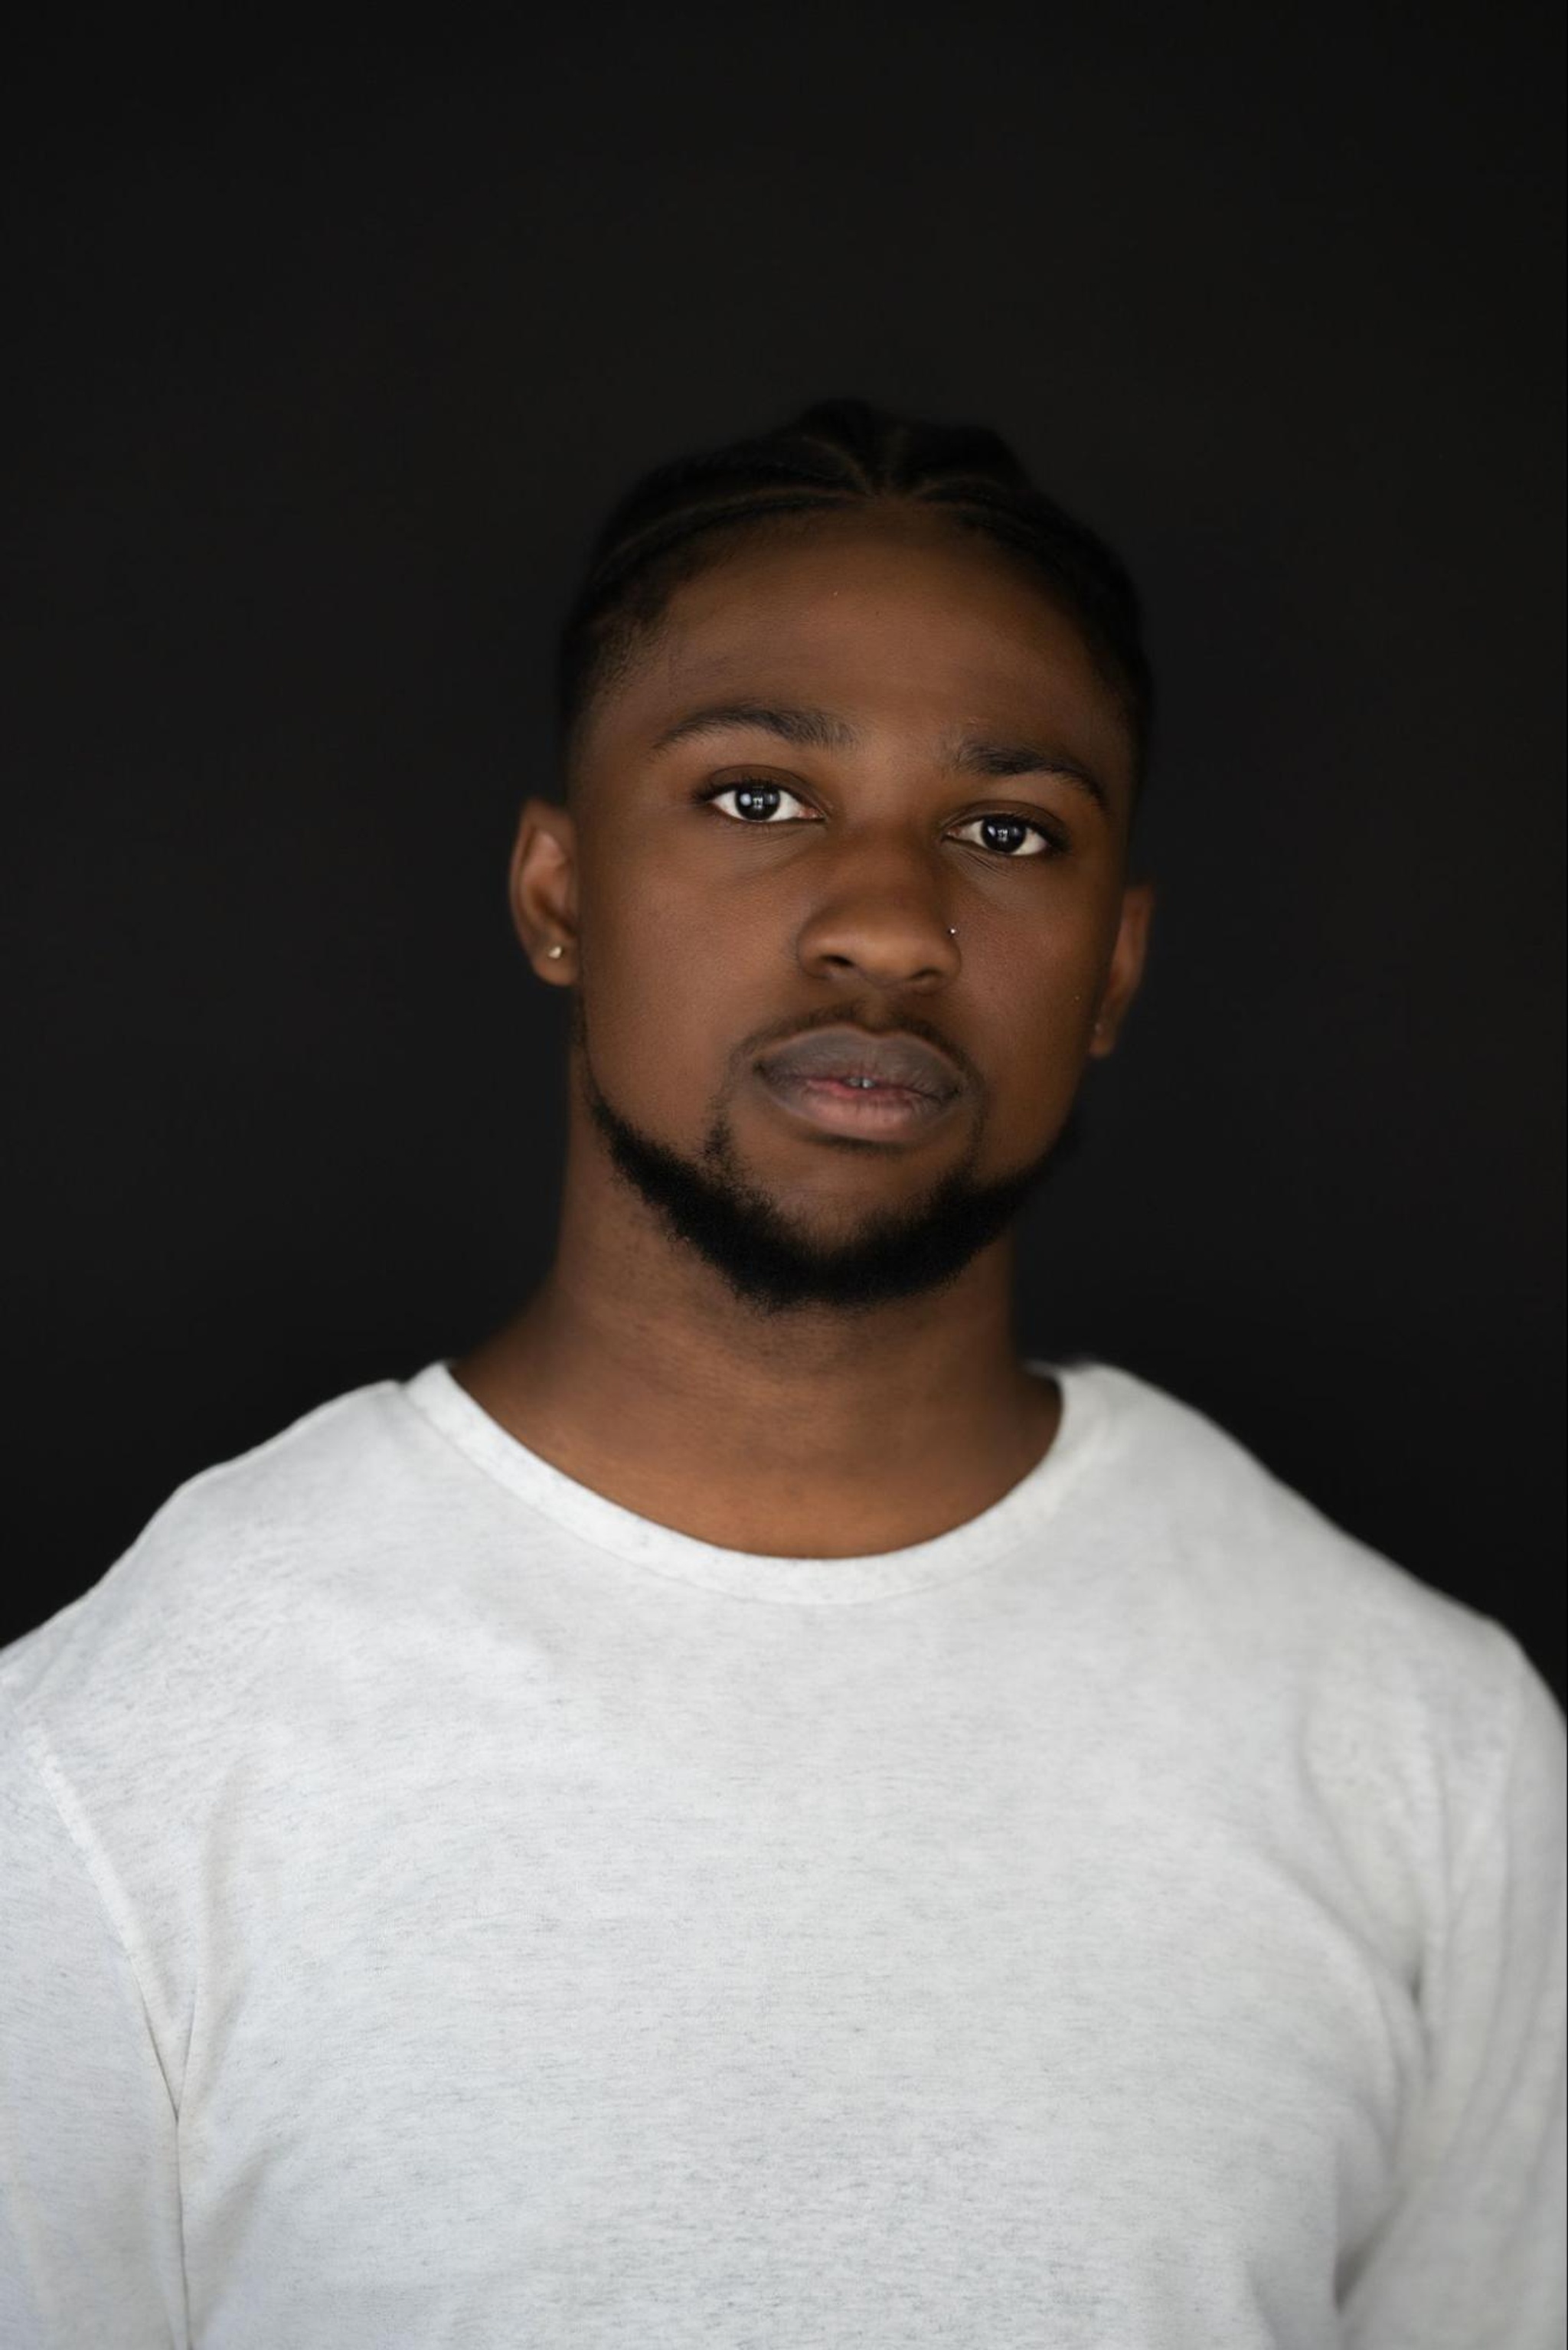 A headshot of dancer Destin Morisset, a Black man with short hair, a thin mustache, and a beard along his jaw line. He looks intently at us, wearing a white t-shirt. 